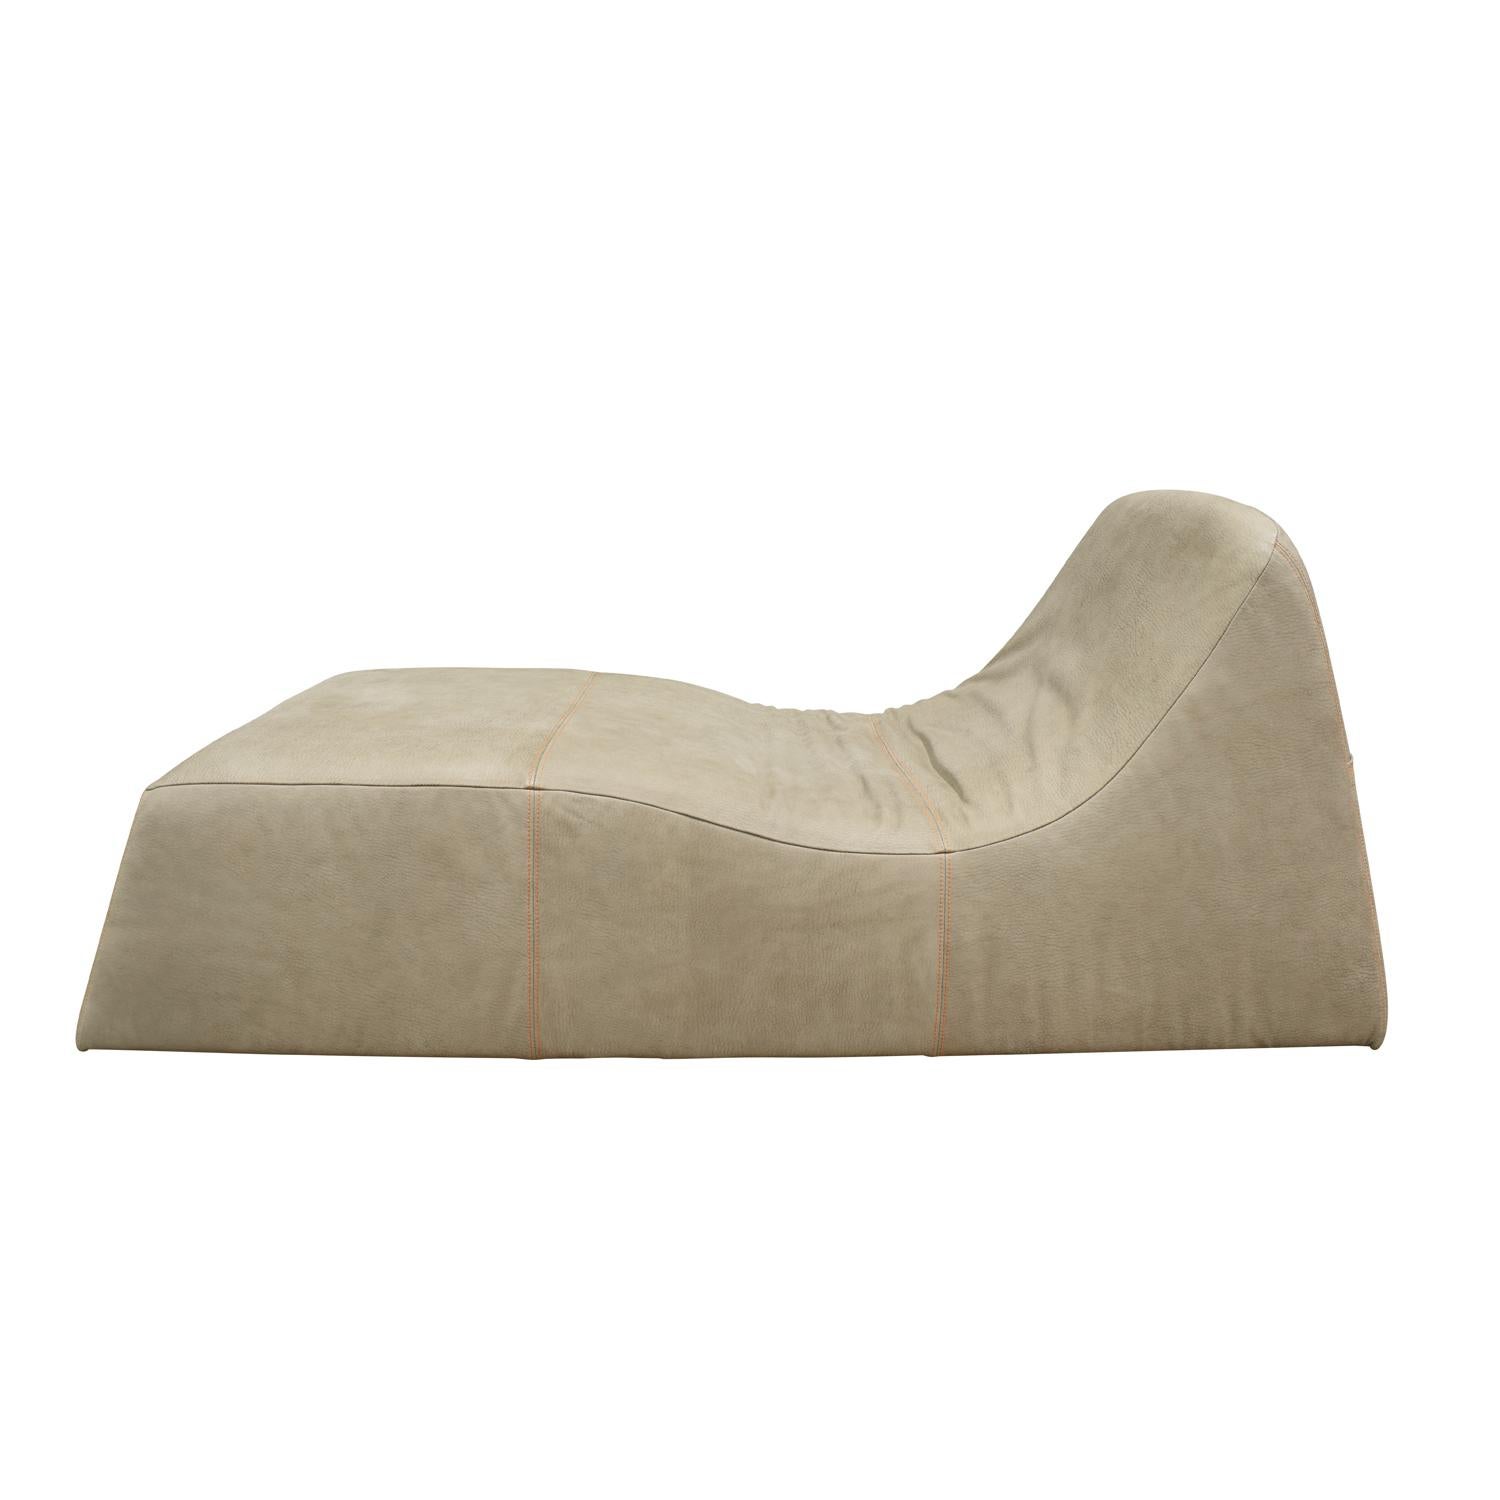 Curvaceous chaise in calf skin with orange stitching, Italian, 1990s. This chaise is very comfortable.